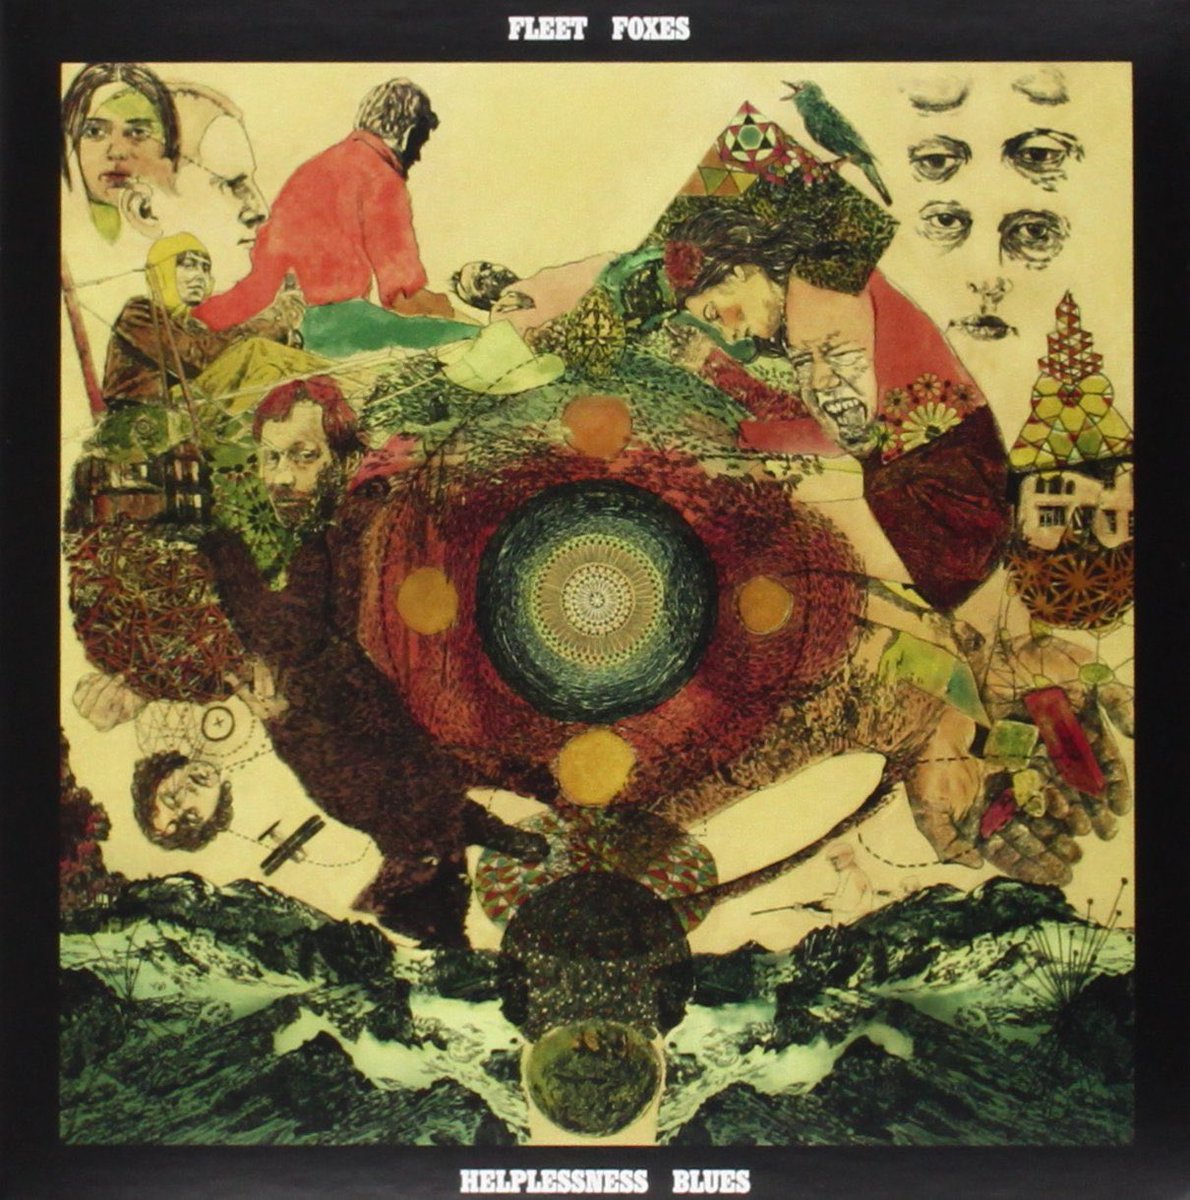 8. Fleet Foxes - Helplessness BluesA very tame and peaceful album with a surprising amount of depth compared to their debut. This project definitely is one that grew on me over the years and it’s the best folk had to offer in the 2010s.